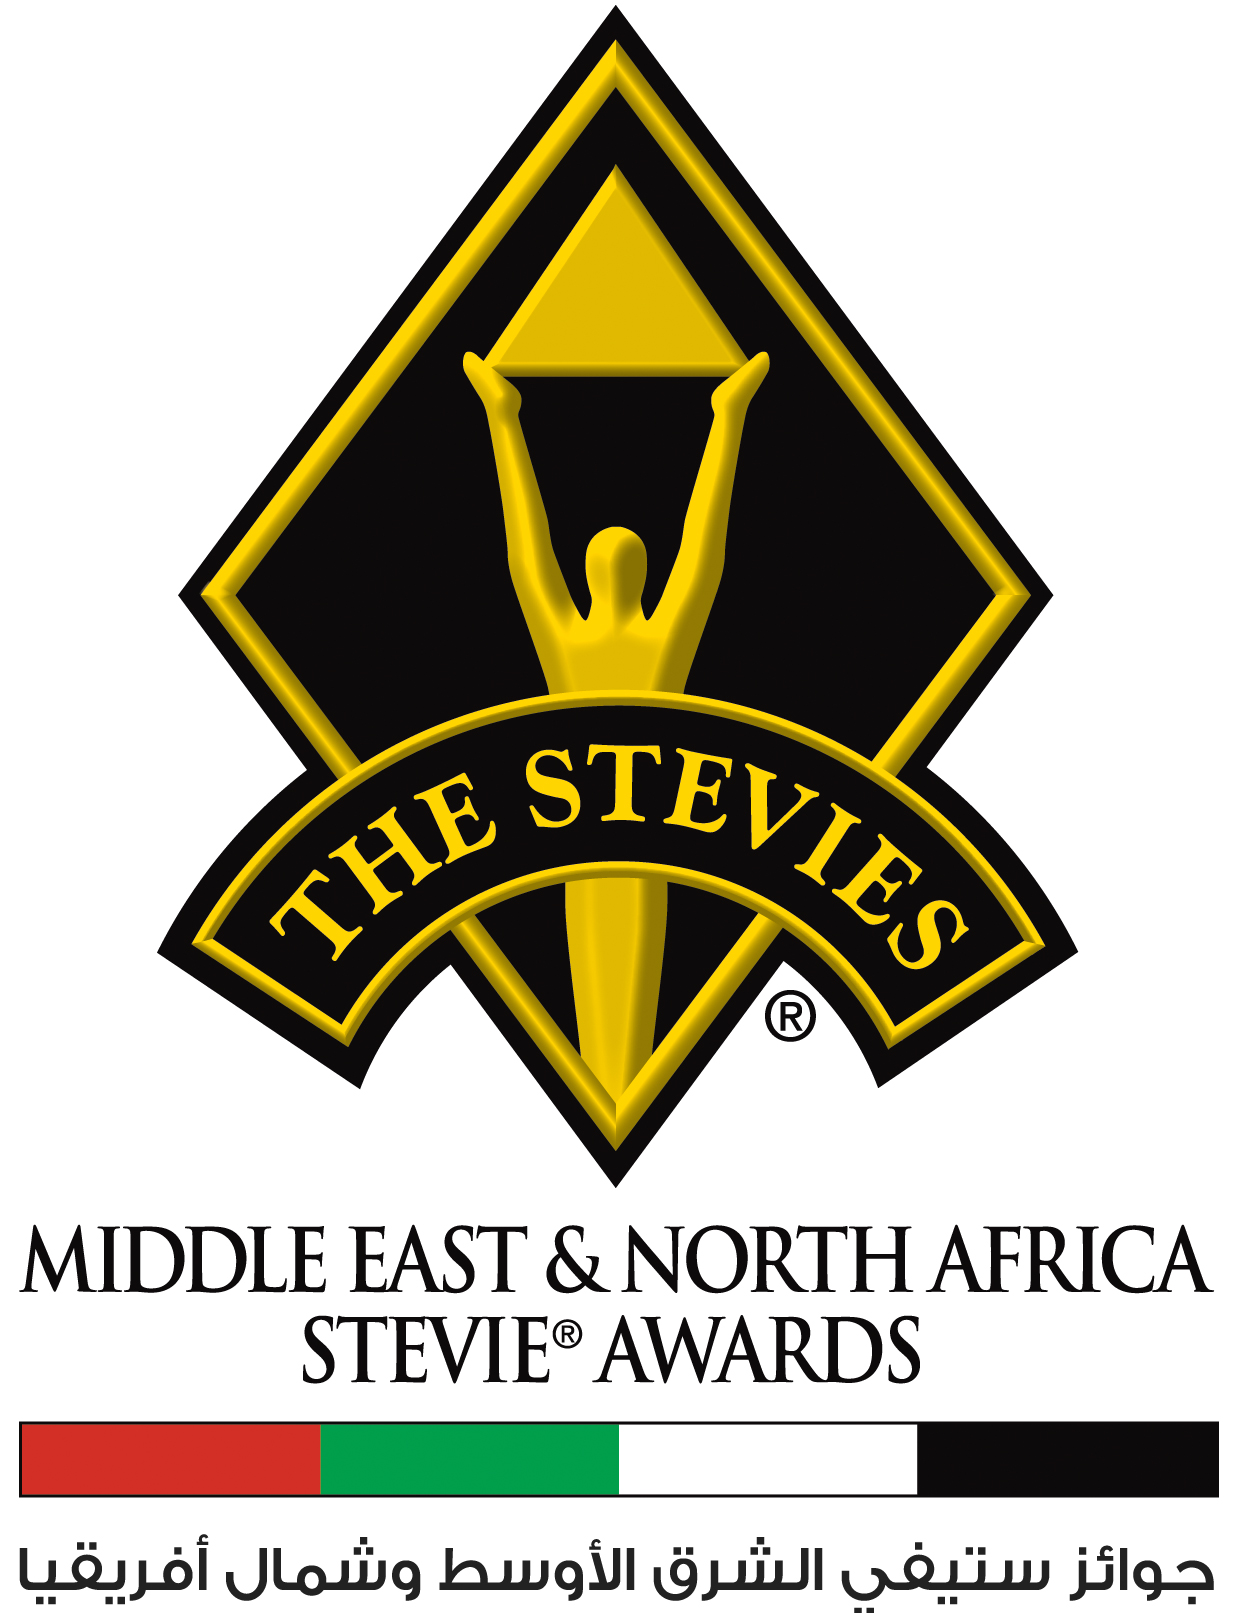 Winners in the 2021 Middle East & North Africa Stevie® Awards Announced